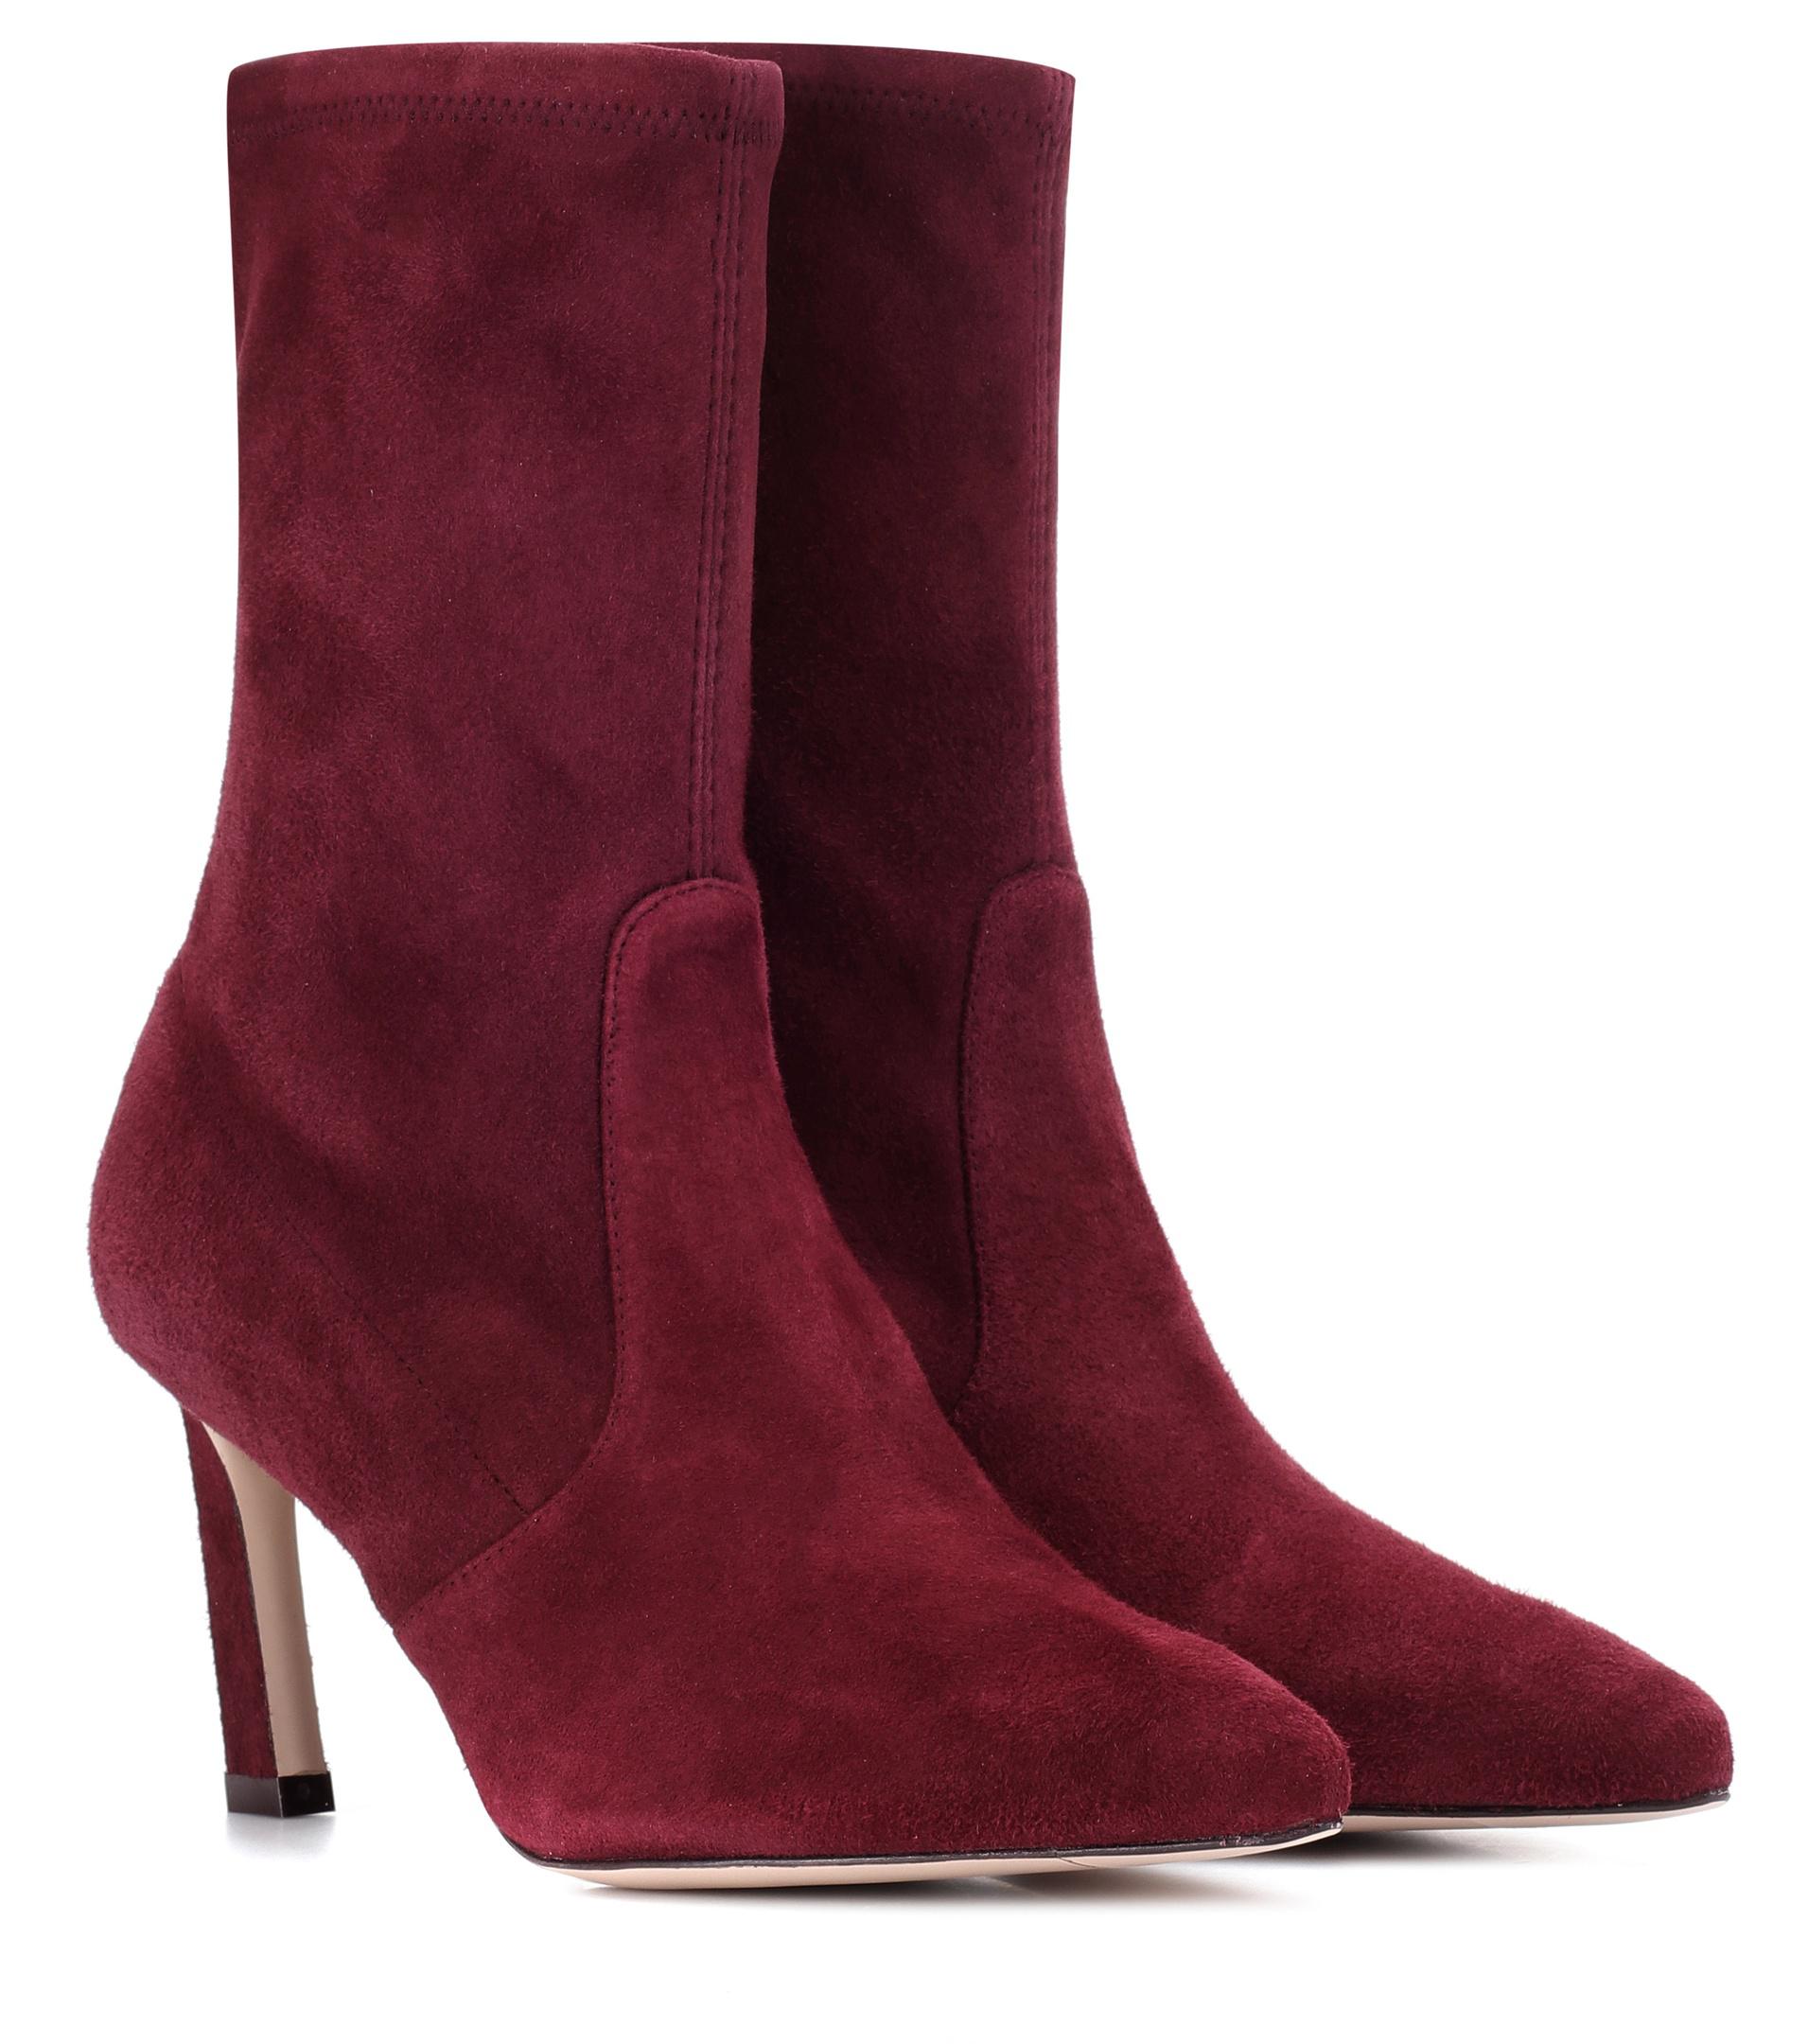 Stuart Weitzman Rapture 75 Suede Ankle Boots in Red - Lyst